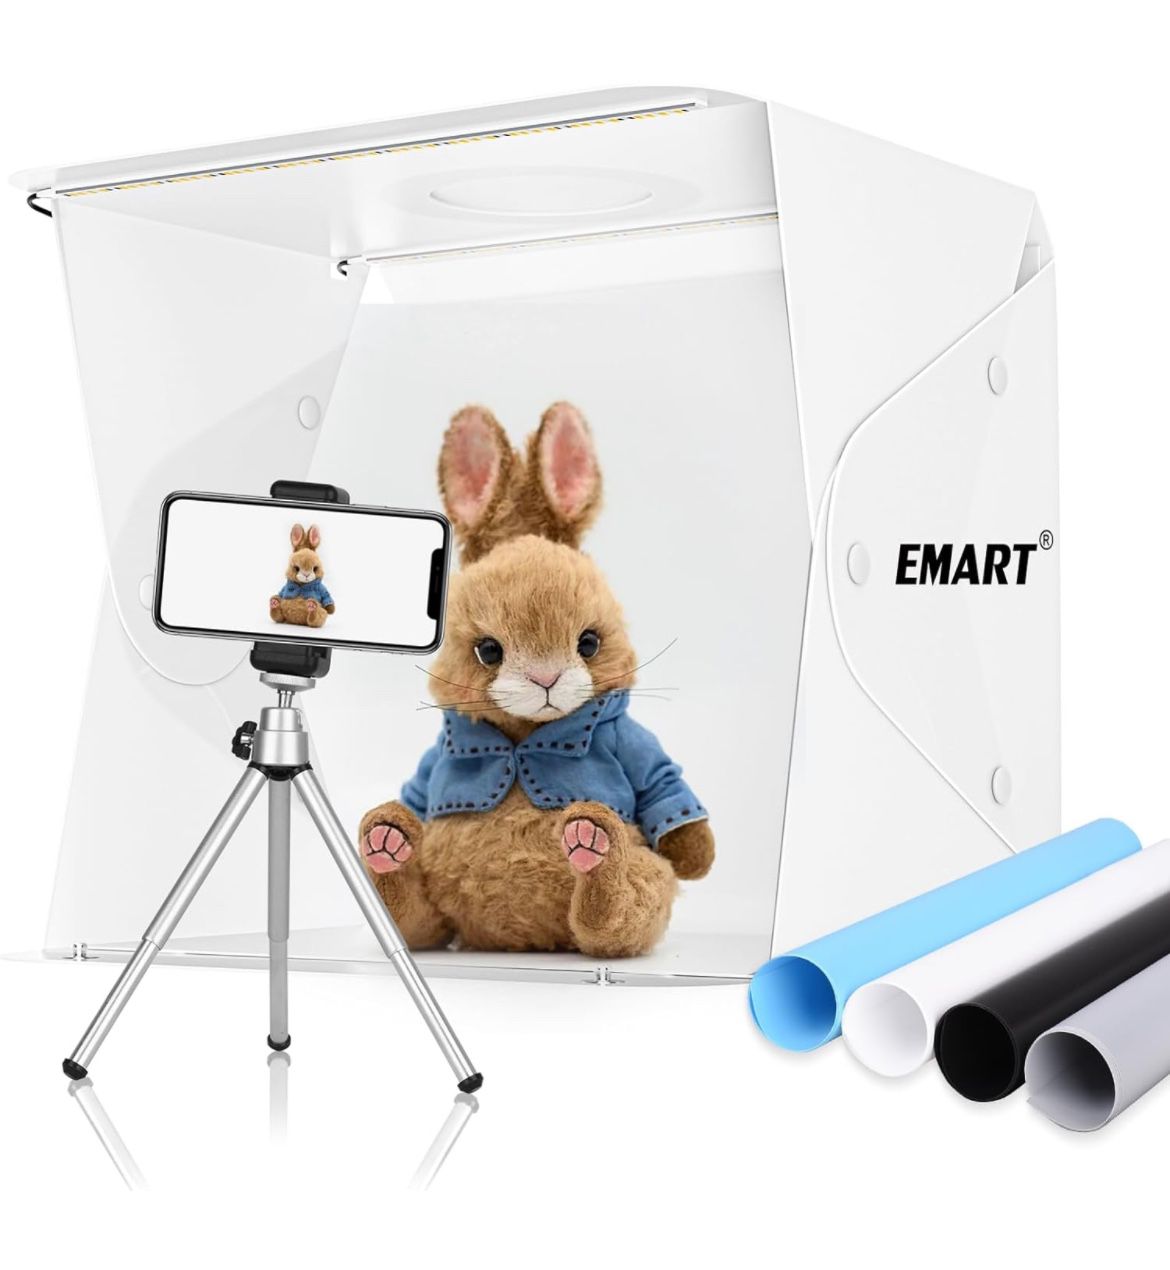 EMART 14" x 16" Photography Table Top Light Box 104 LED Portable Photo Studio Shooting Tent with Color Backdrops and Phone Tripod Holder